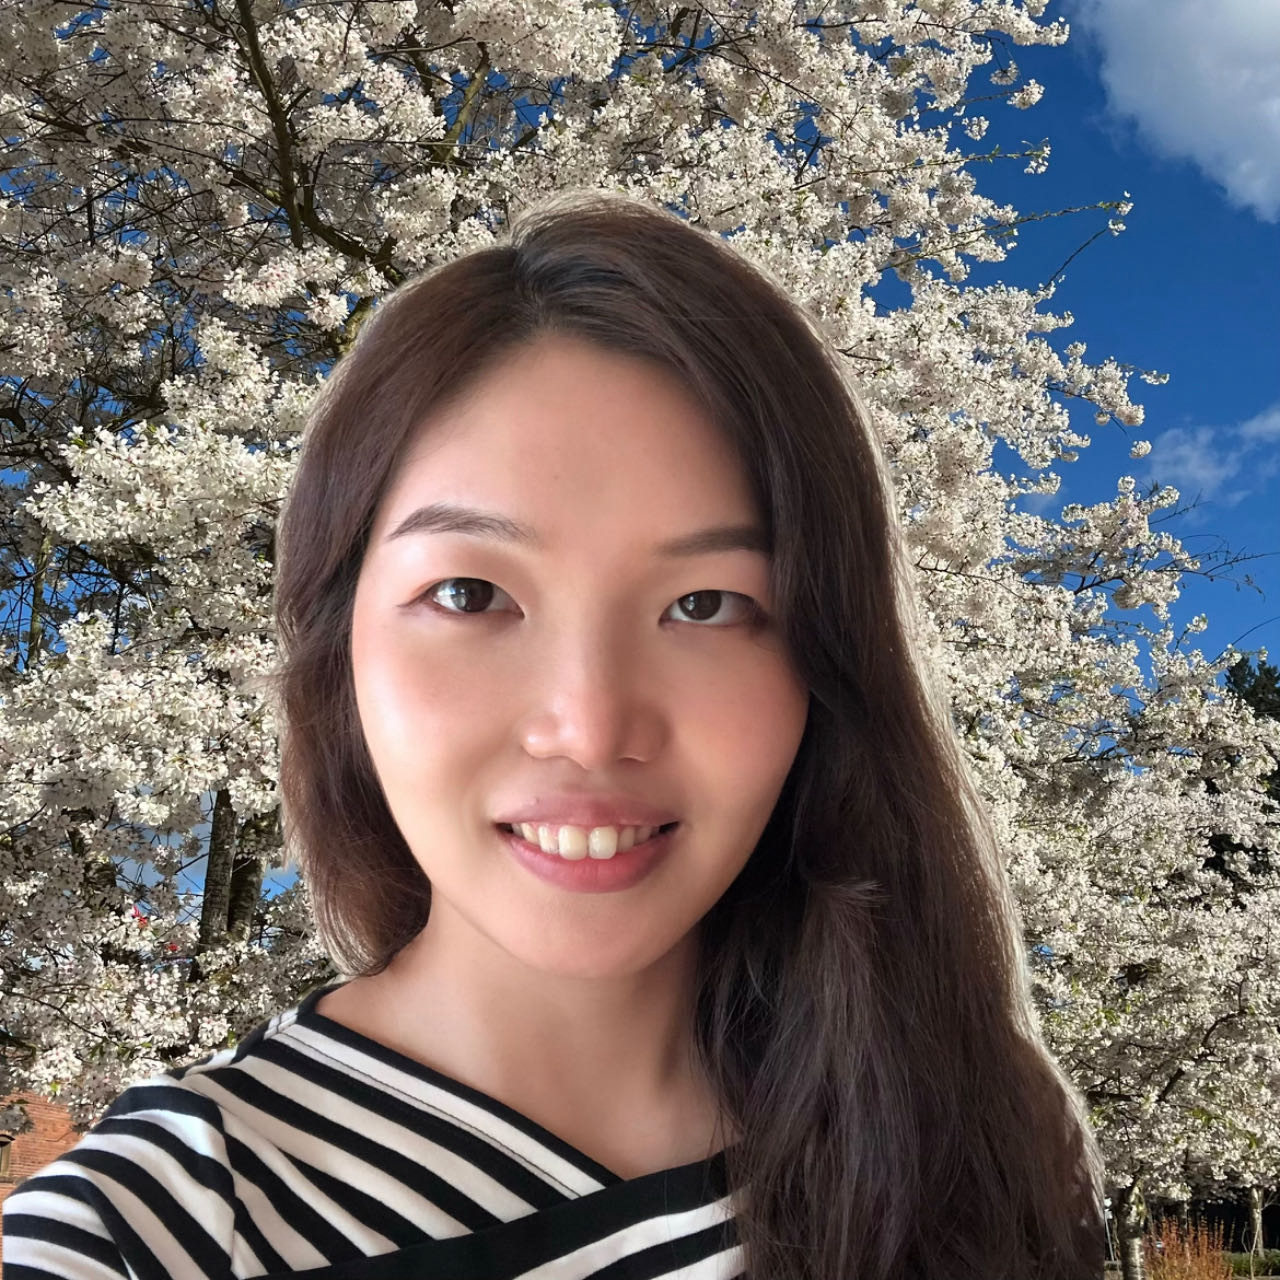 Shiqing Pan, Full-Stack Software Developer, One Community Volunteer, Highest Good collaboration, people making a difference, One Community Global, helping create global change, difference makers